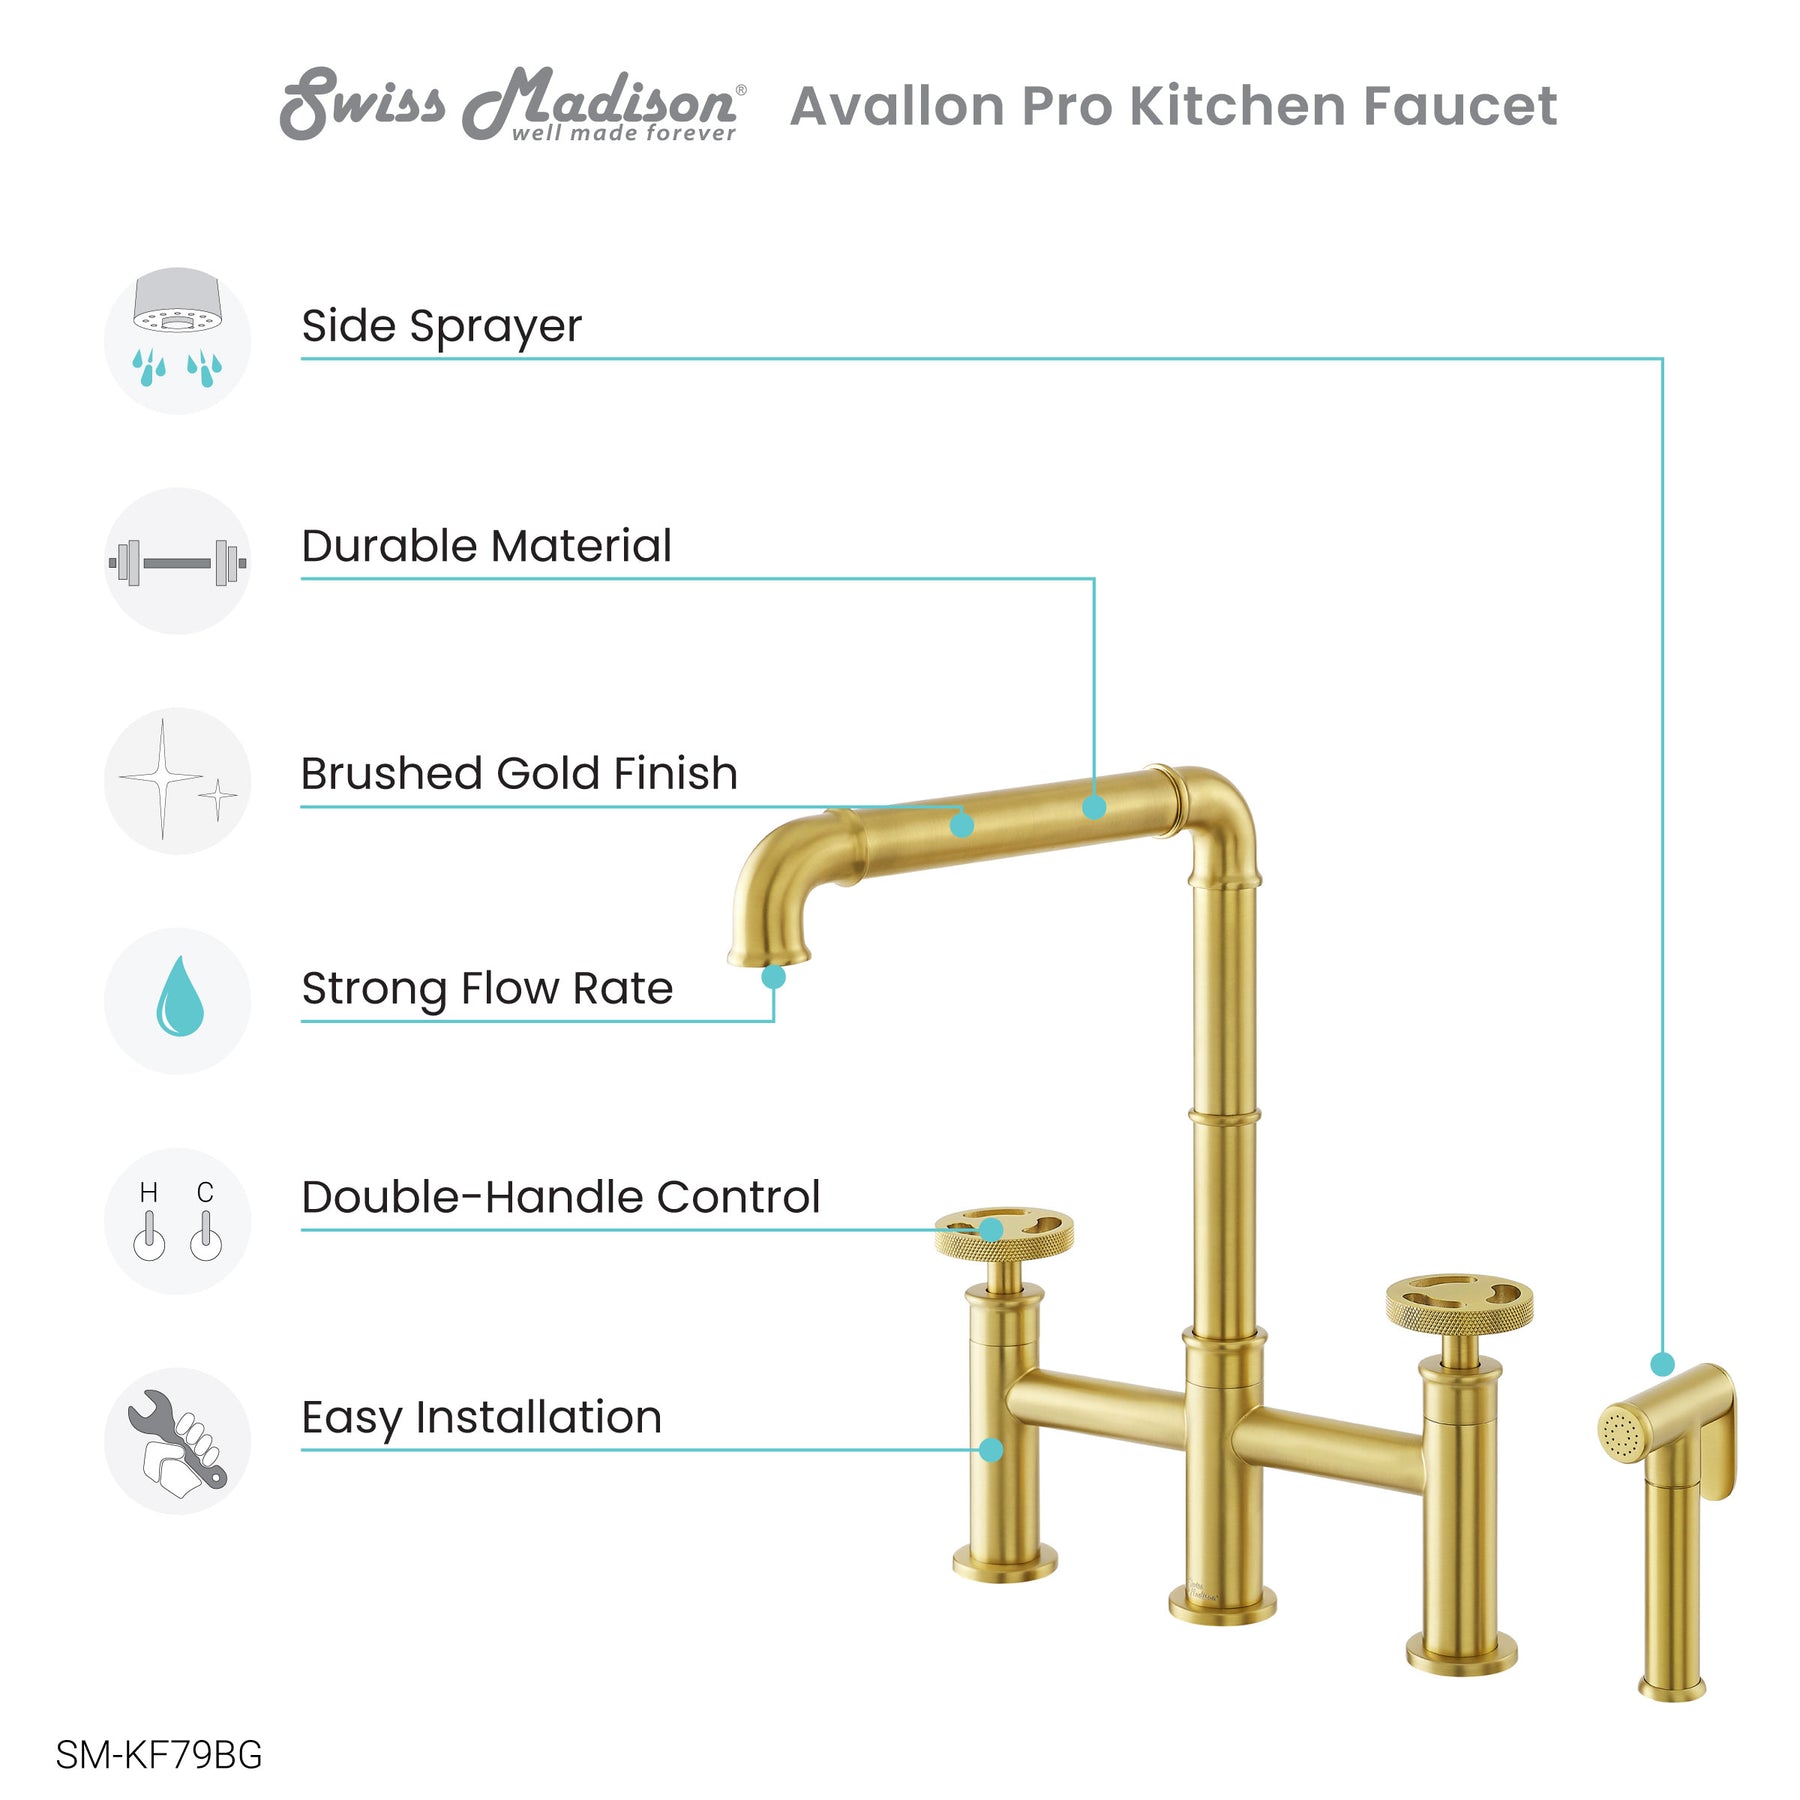 Swiss Madison Avallon Pro Widespread Kitchen Faucet with Side Sprayer SM-KF79